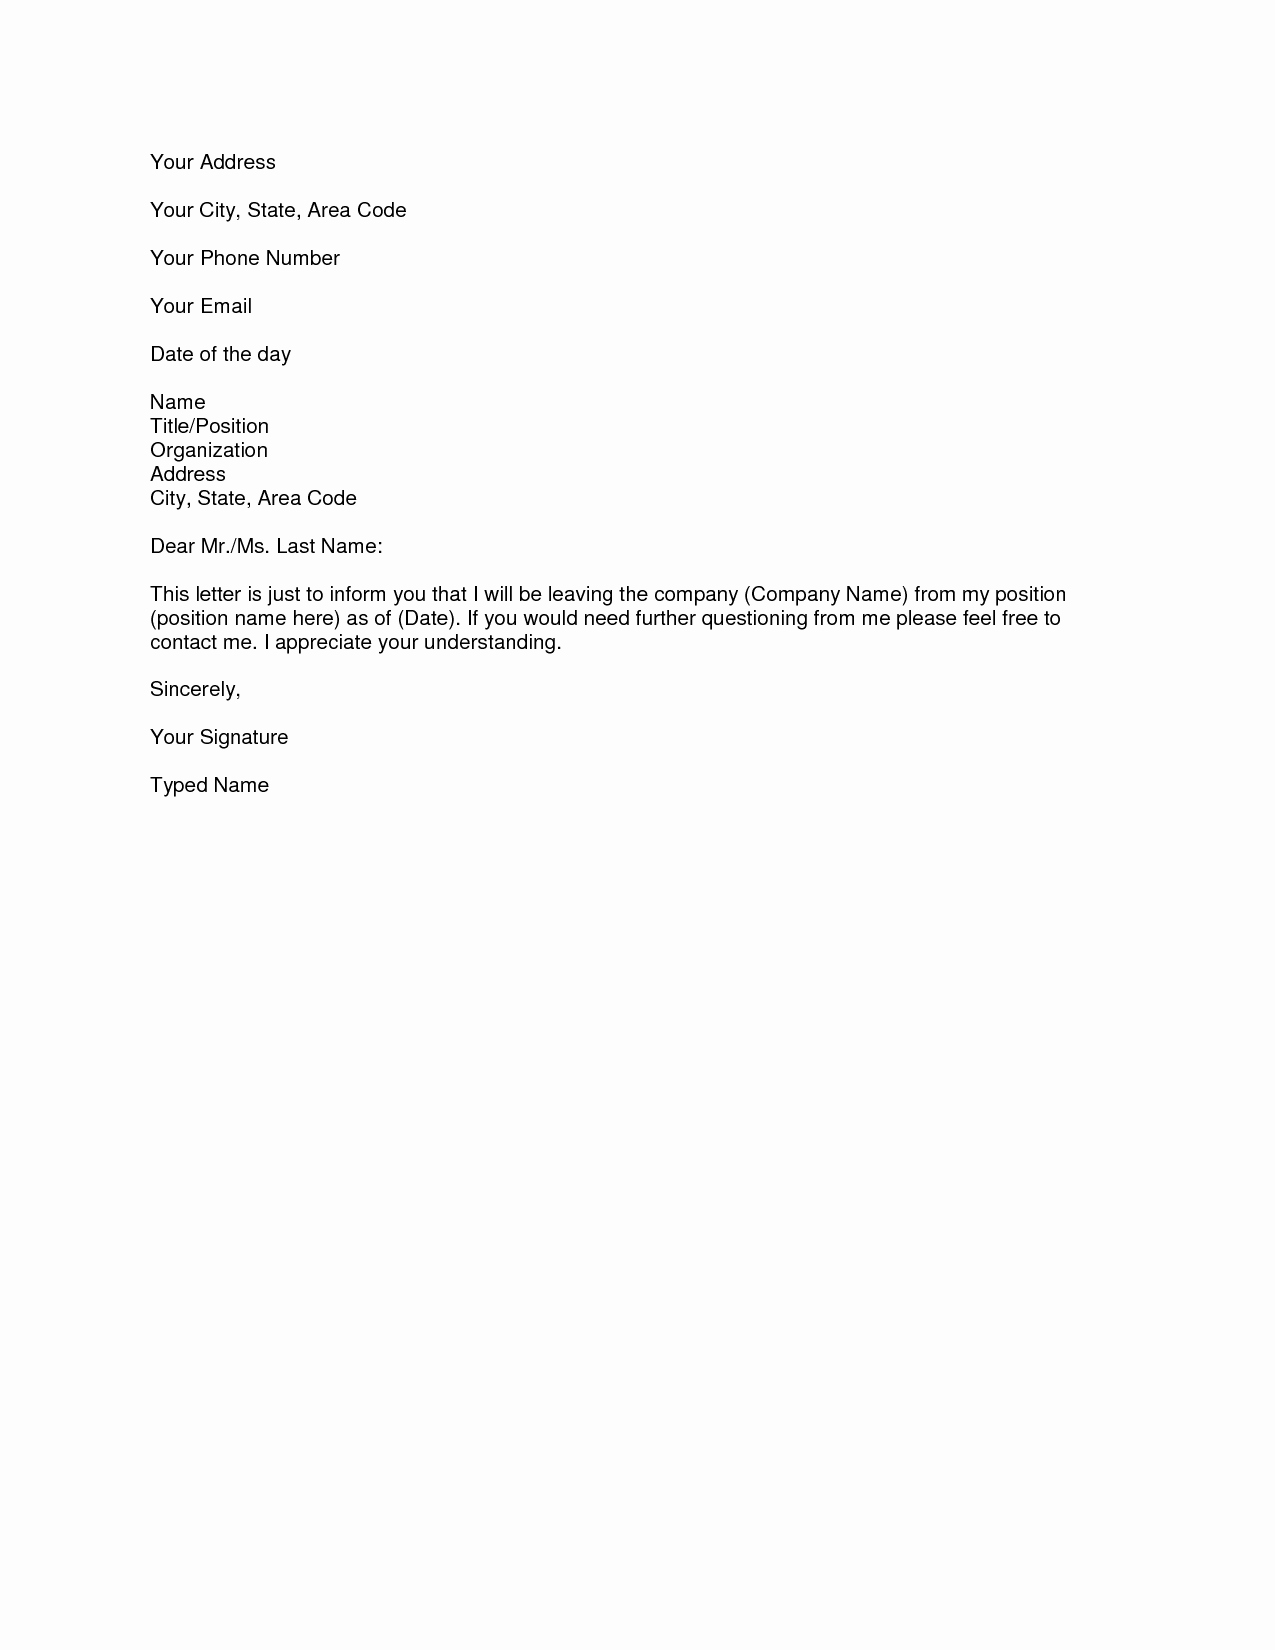 Resignation Letter Template Free Awesome Resignation Letter Samples Download Pdf Doc format